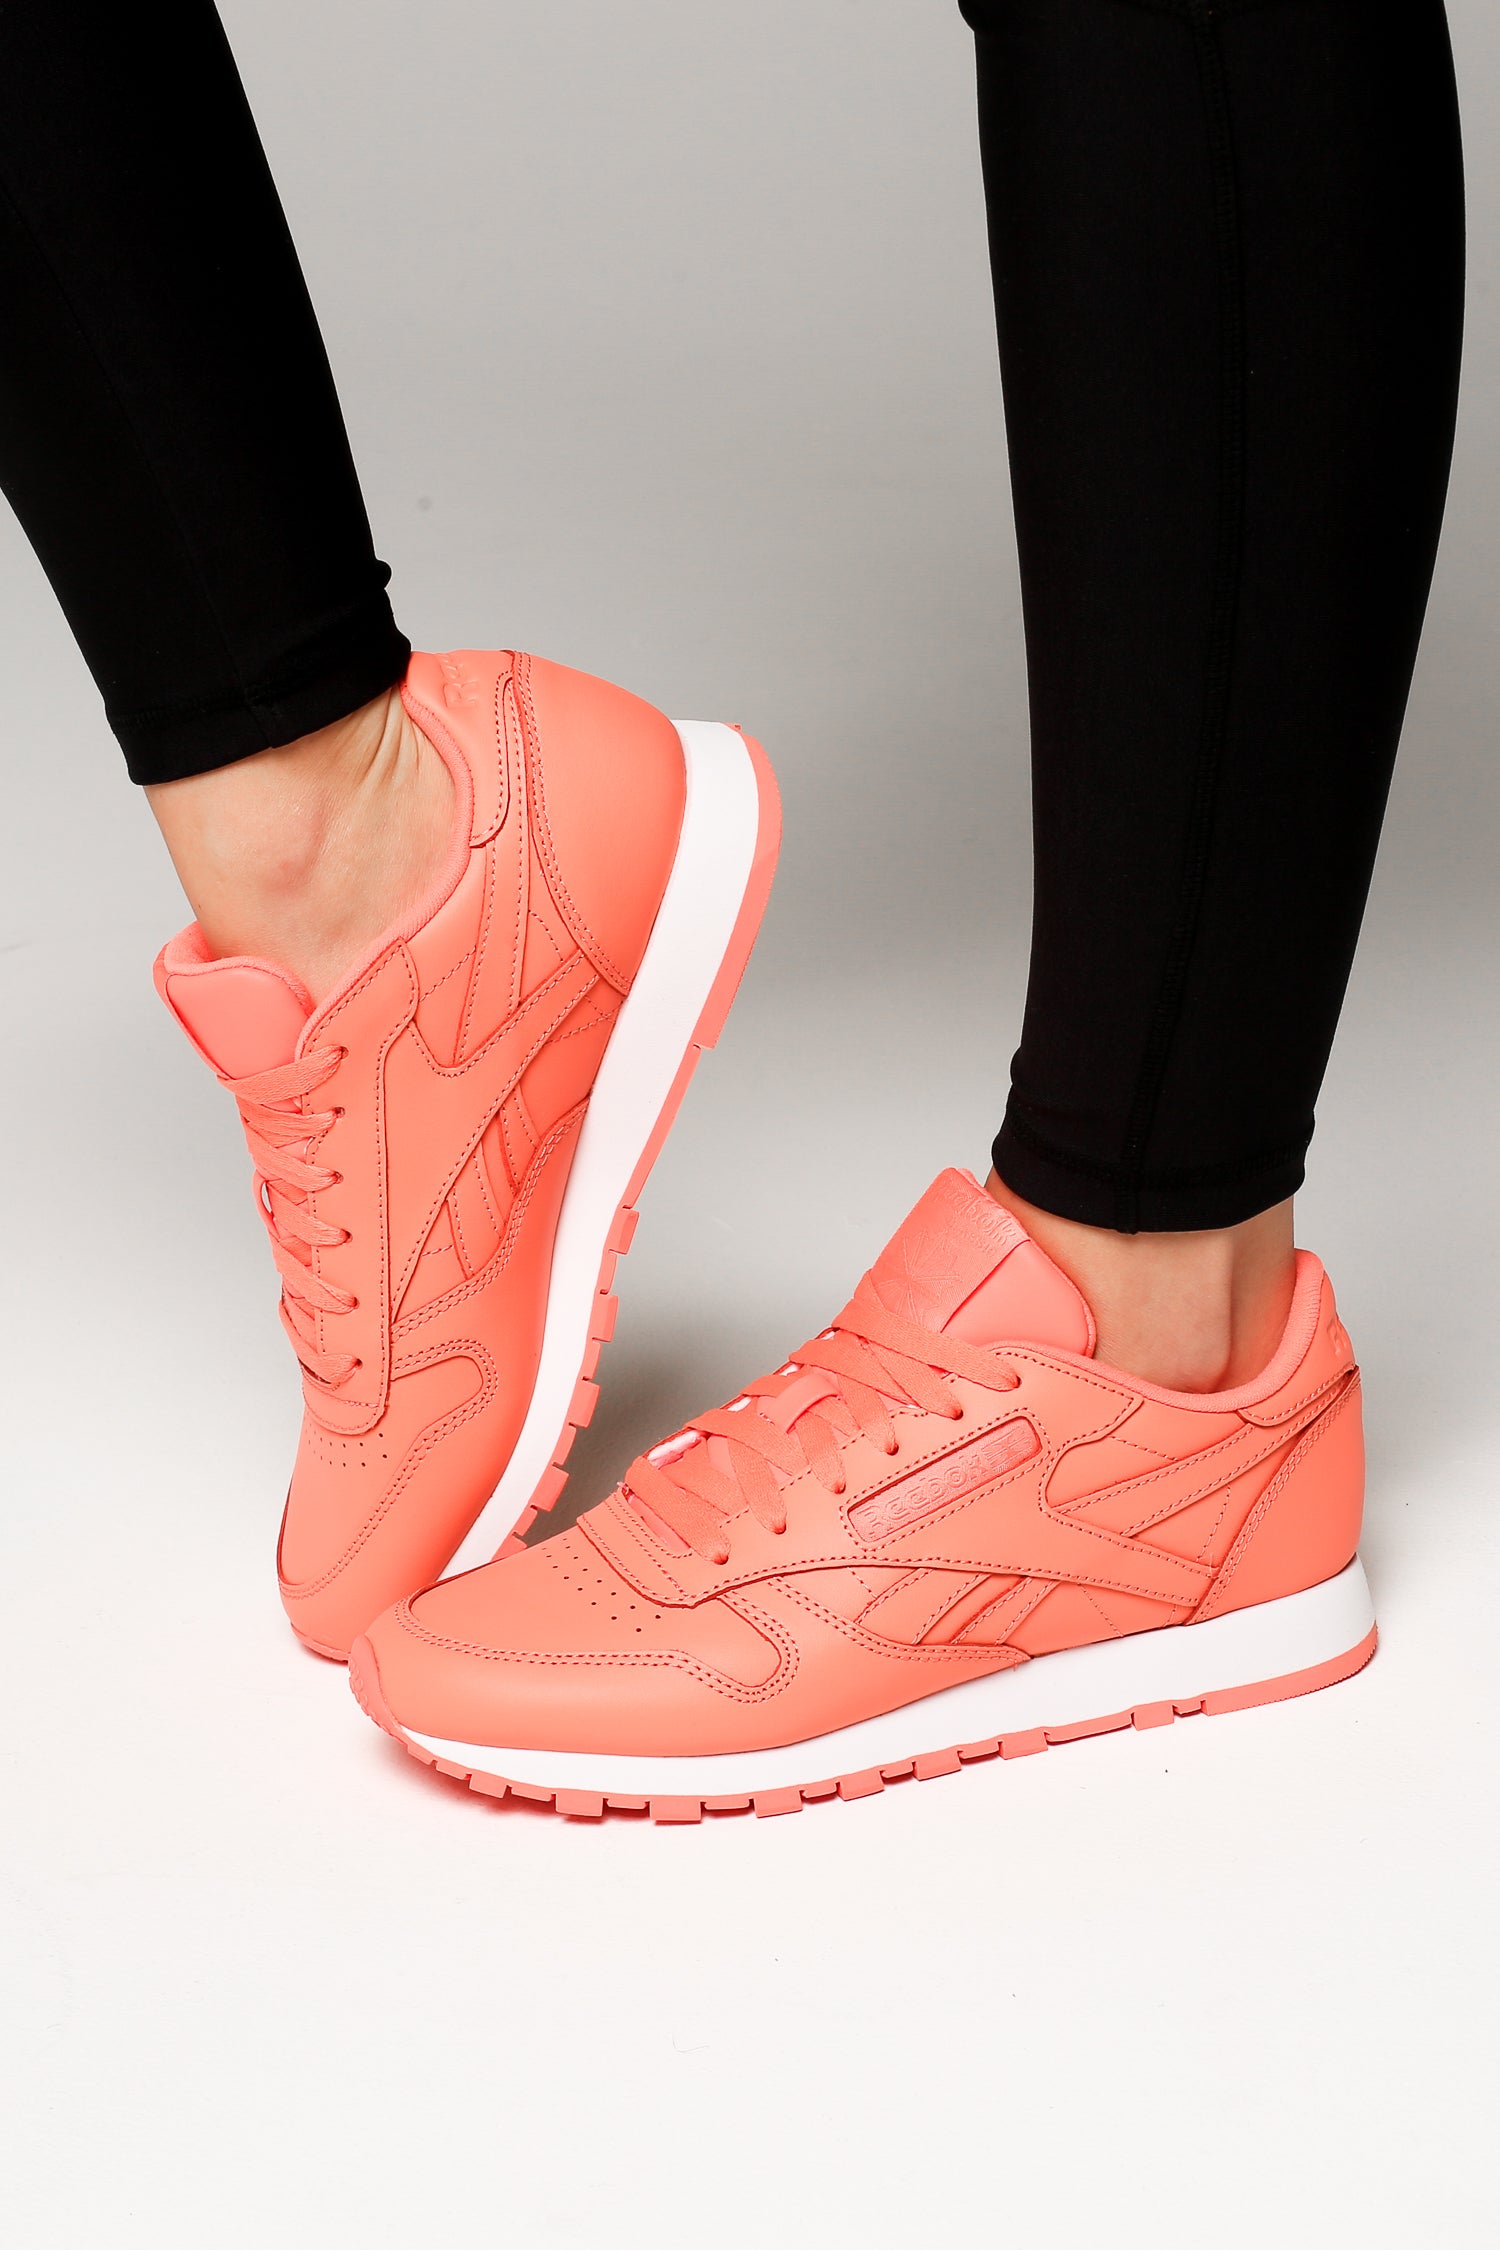 reebok classic leather ice coral